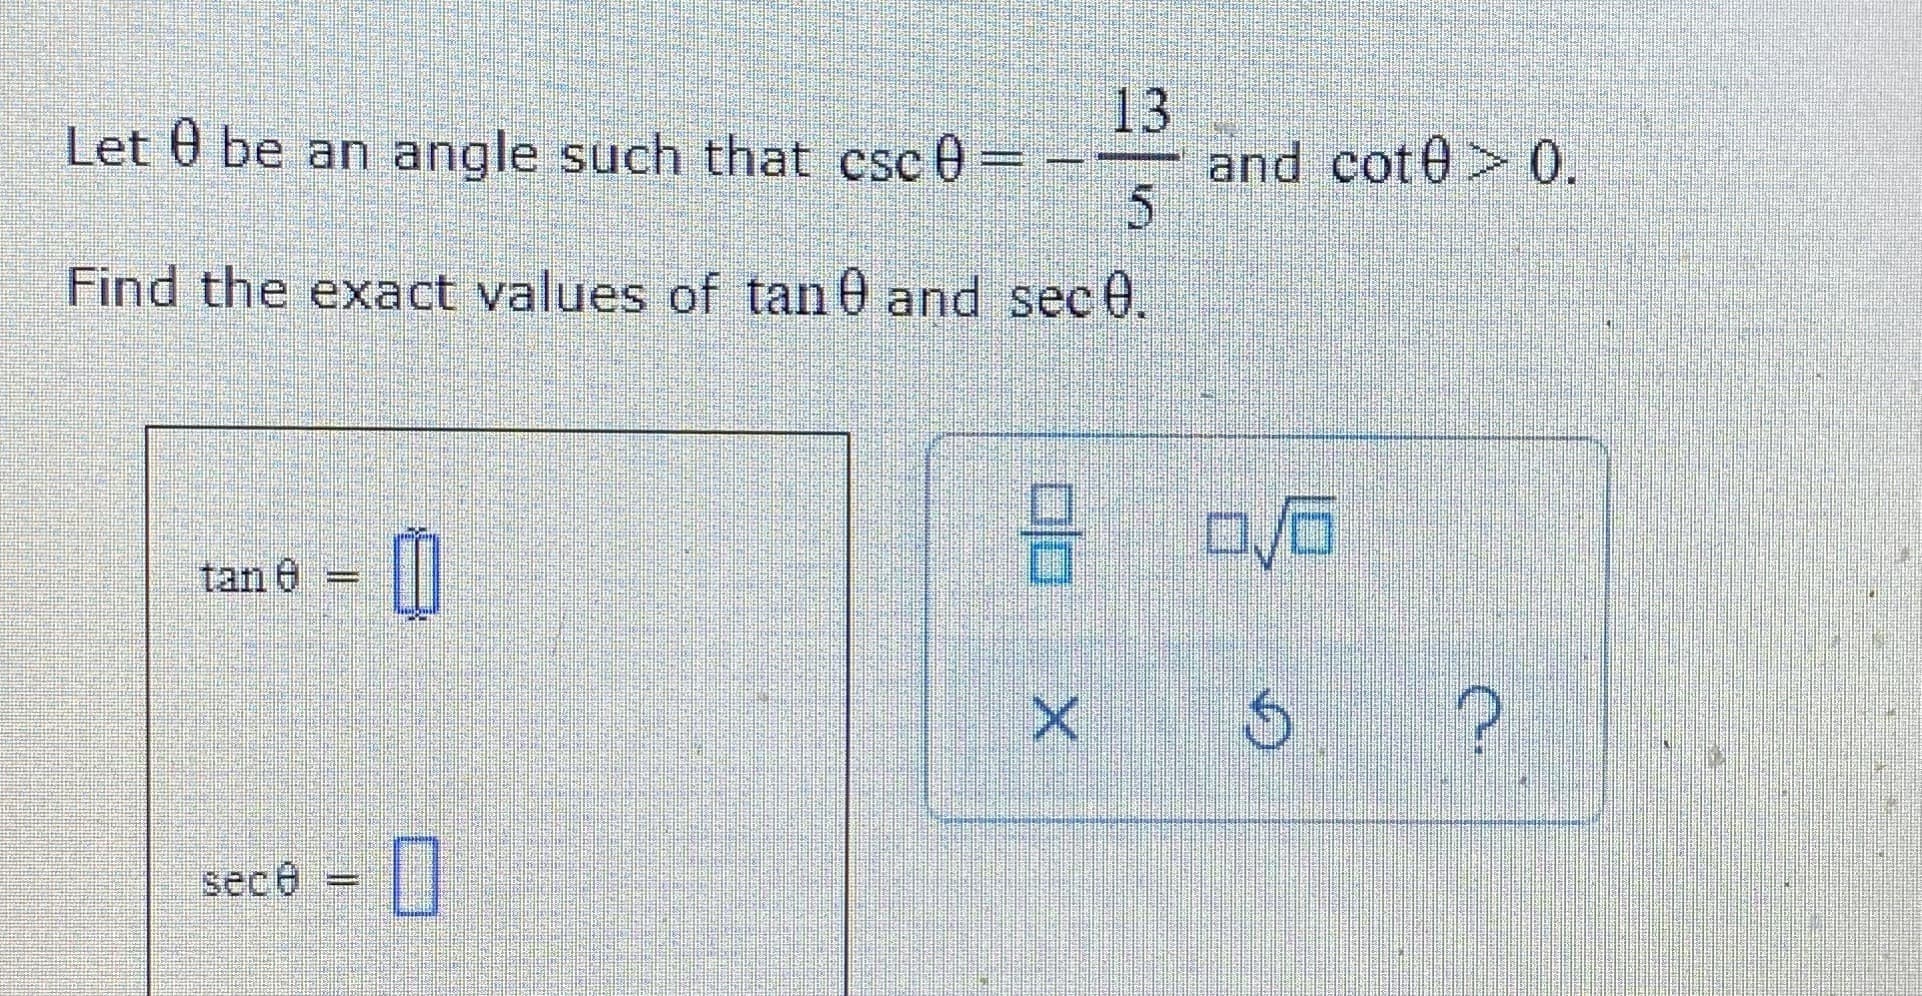 Let 0 be an angle such that csc 0 = -
13
and cot0> 0.
Find the exact values of tan 0 and sec 0.
tan e
